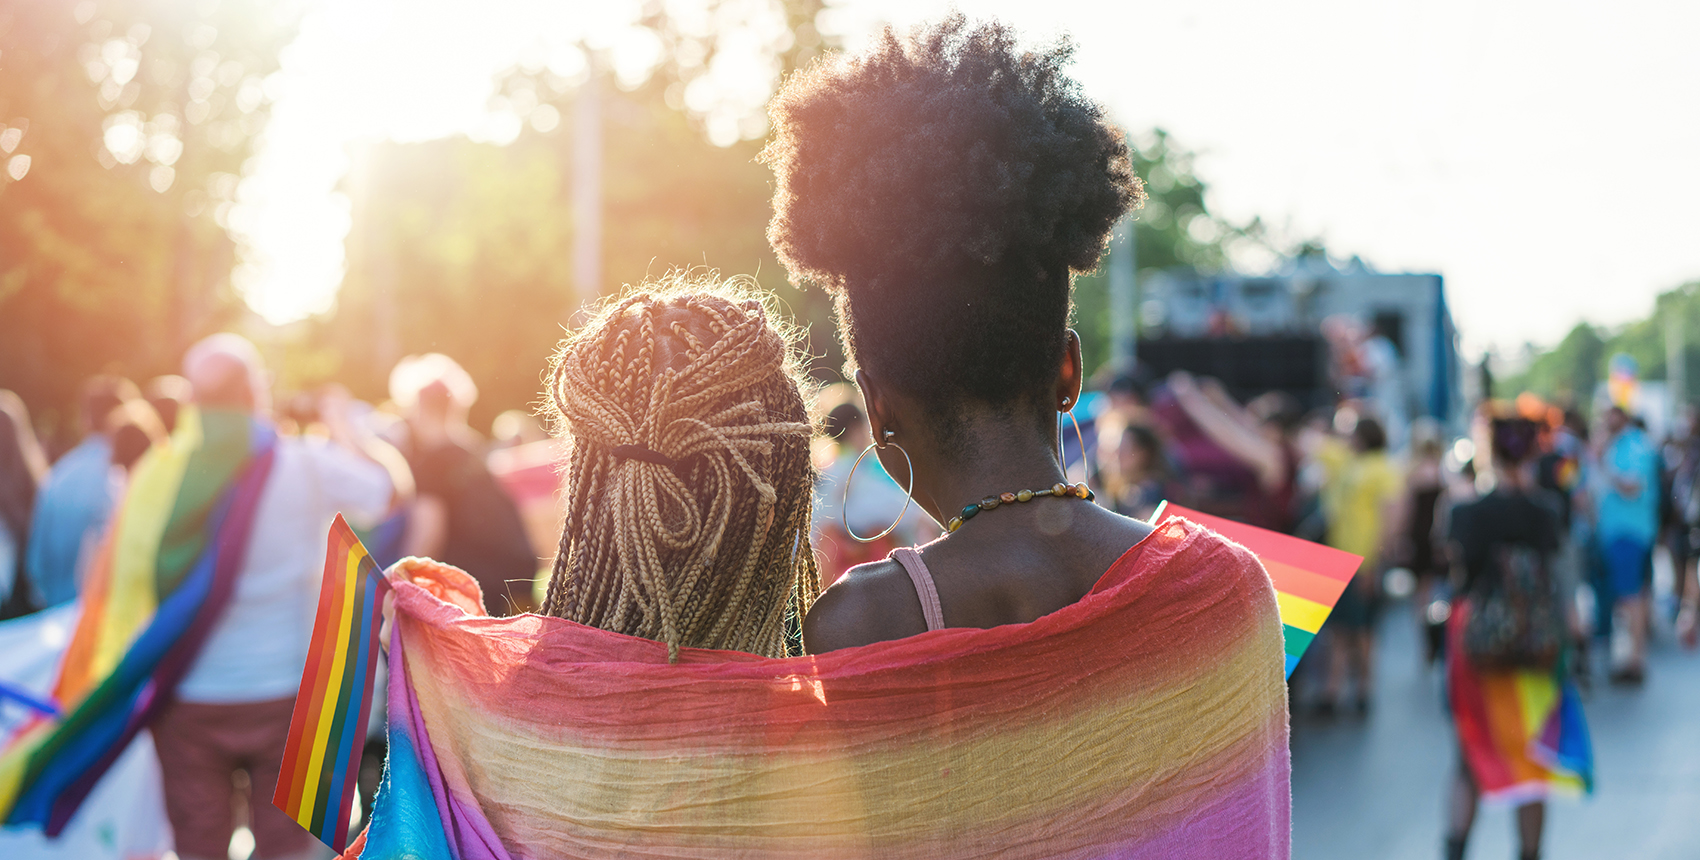 Rear view image of two people with braided, long hair, wrapped in a rainbow scarf walking with other people waving rainbow flags 